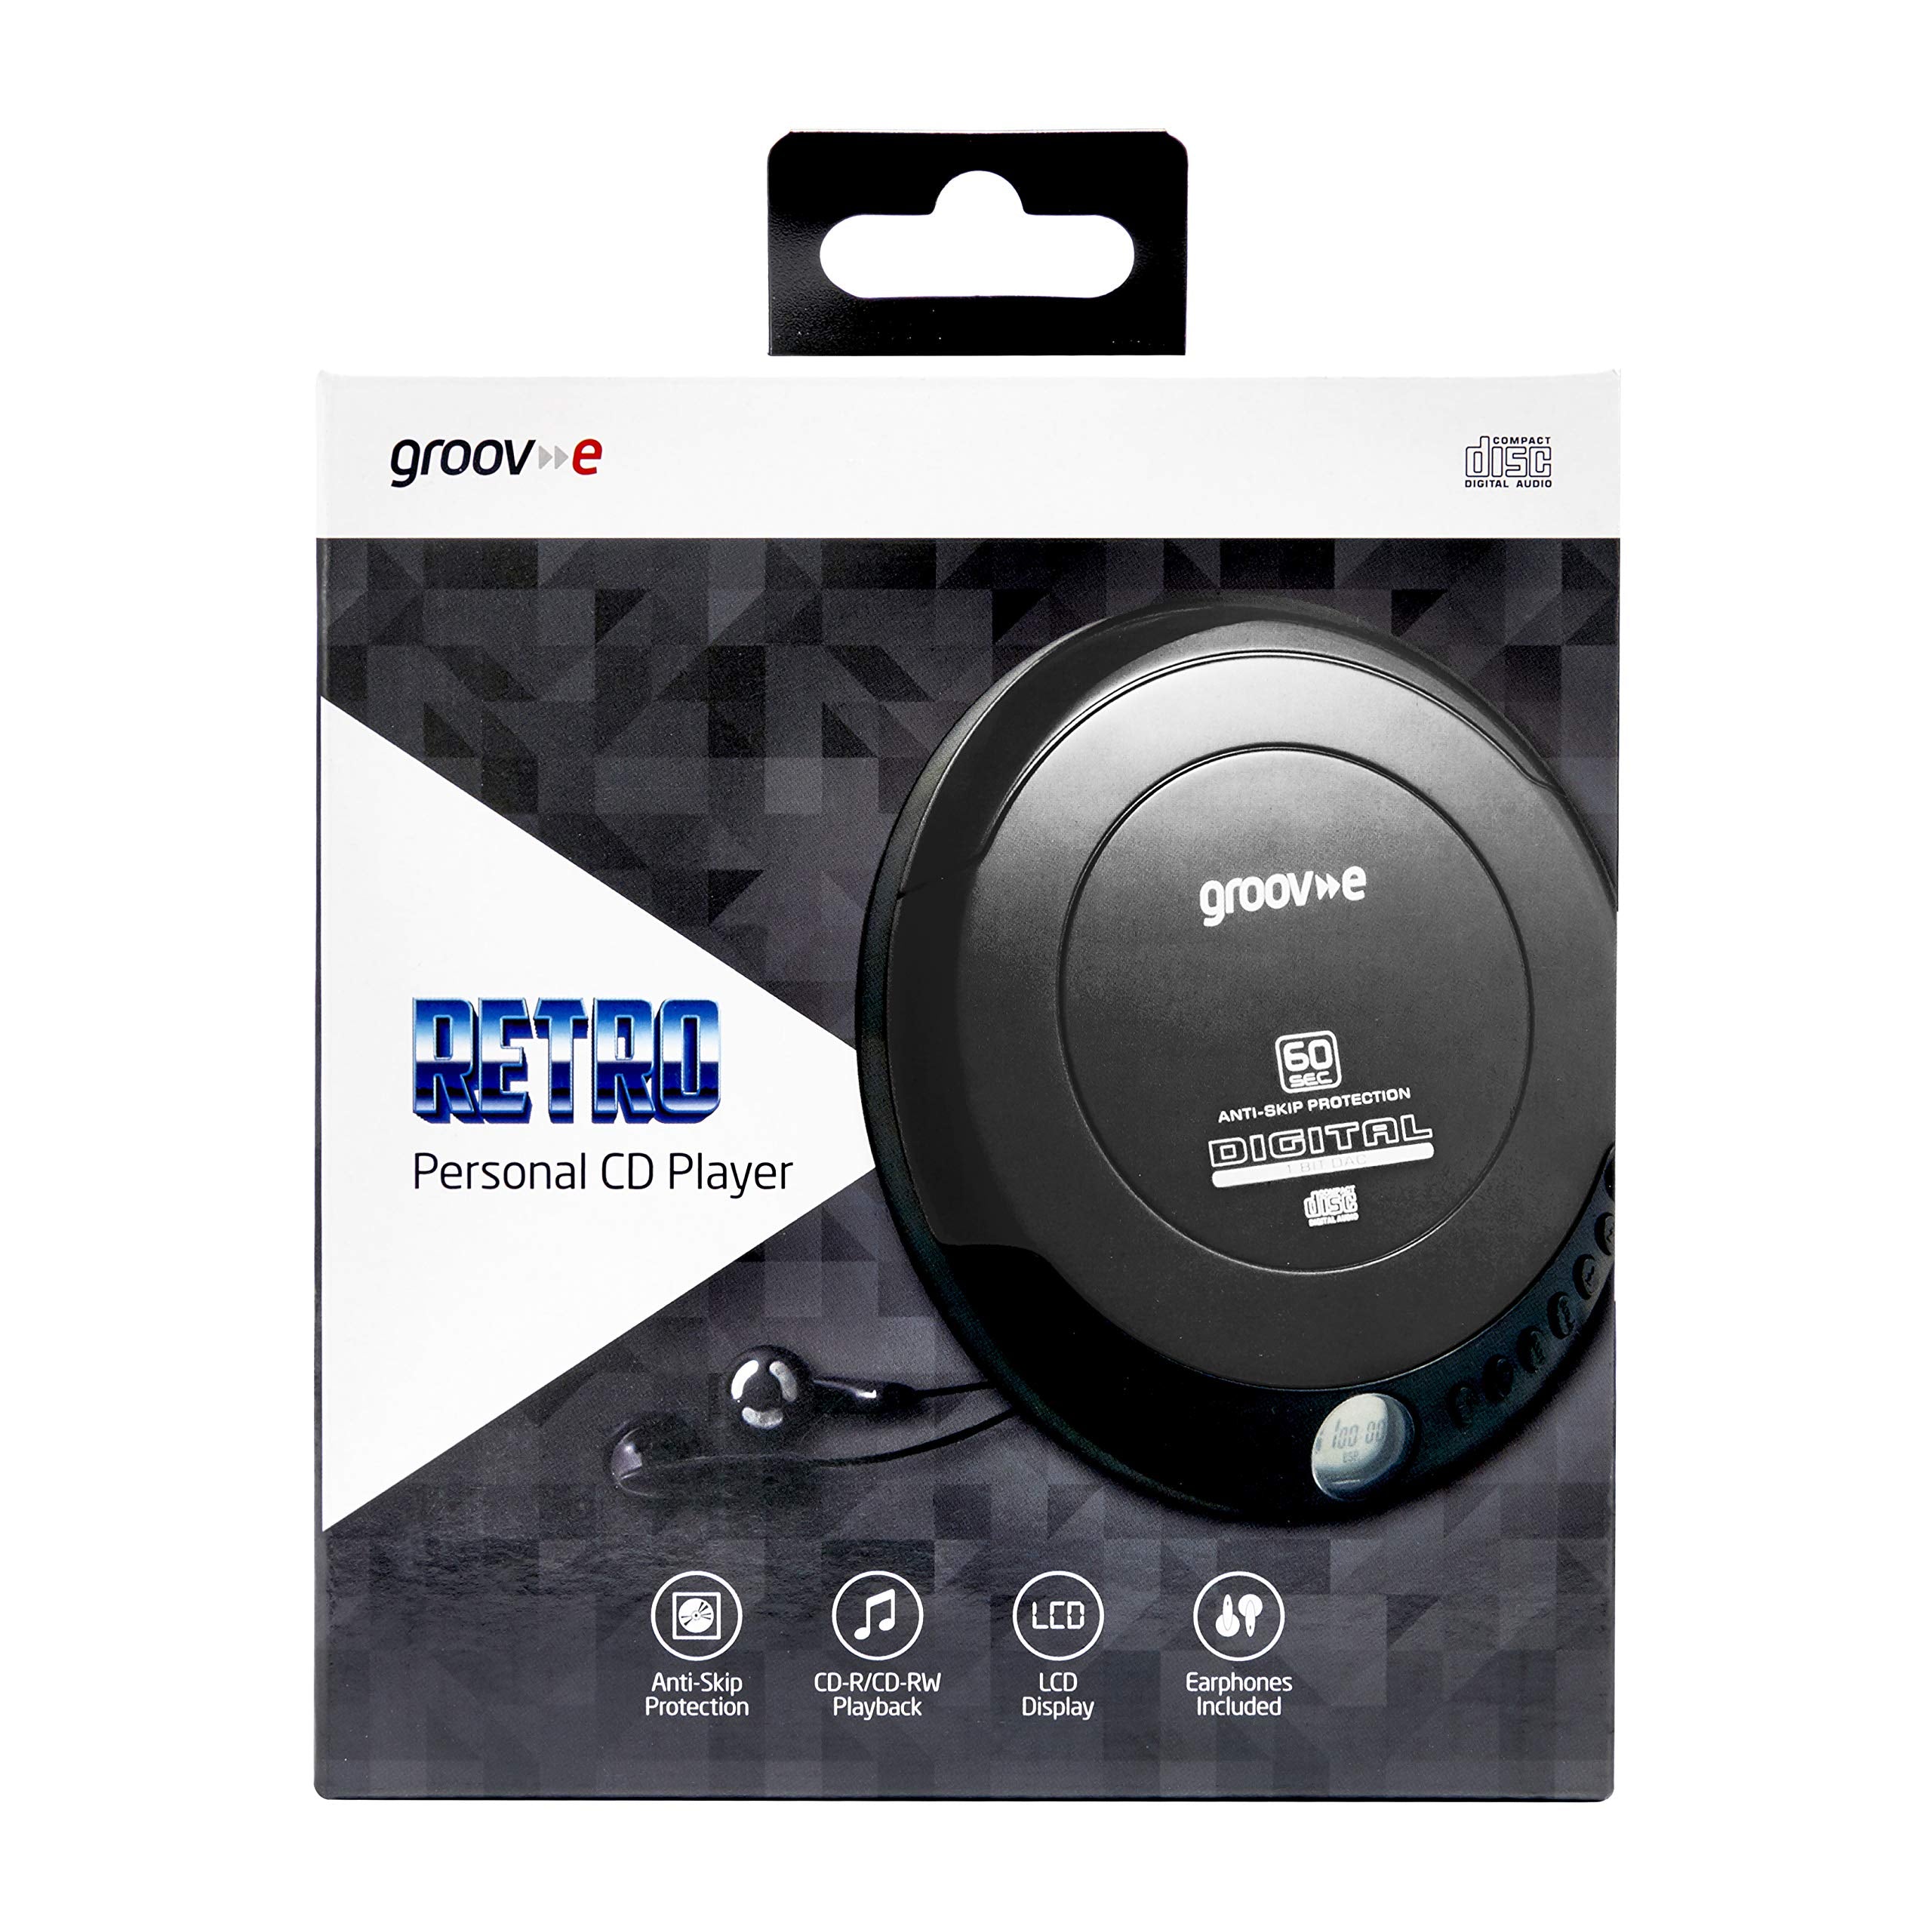 Groov-e GVPS110BK Retro Personal CD Player with 20 Track Programmable Memory, LCD Display, Anti-Skip Protection and Earphones Included - Black